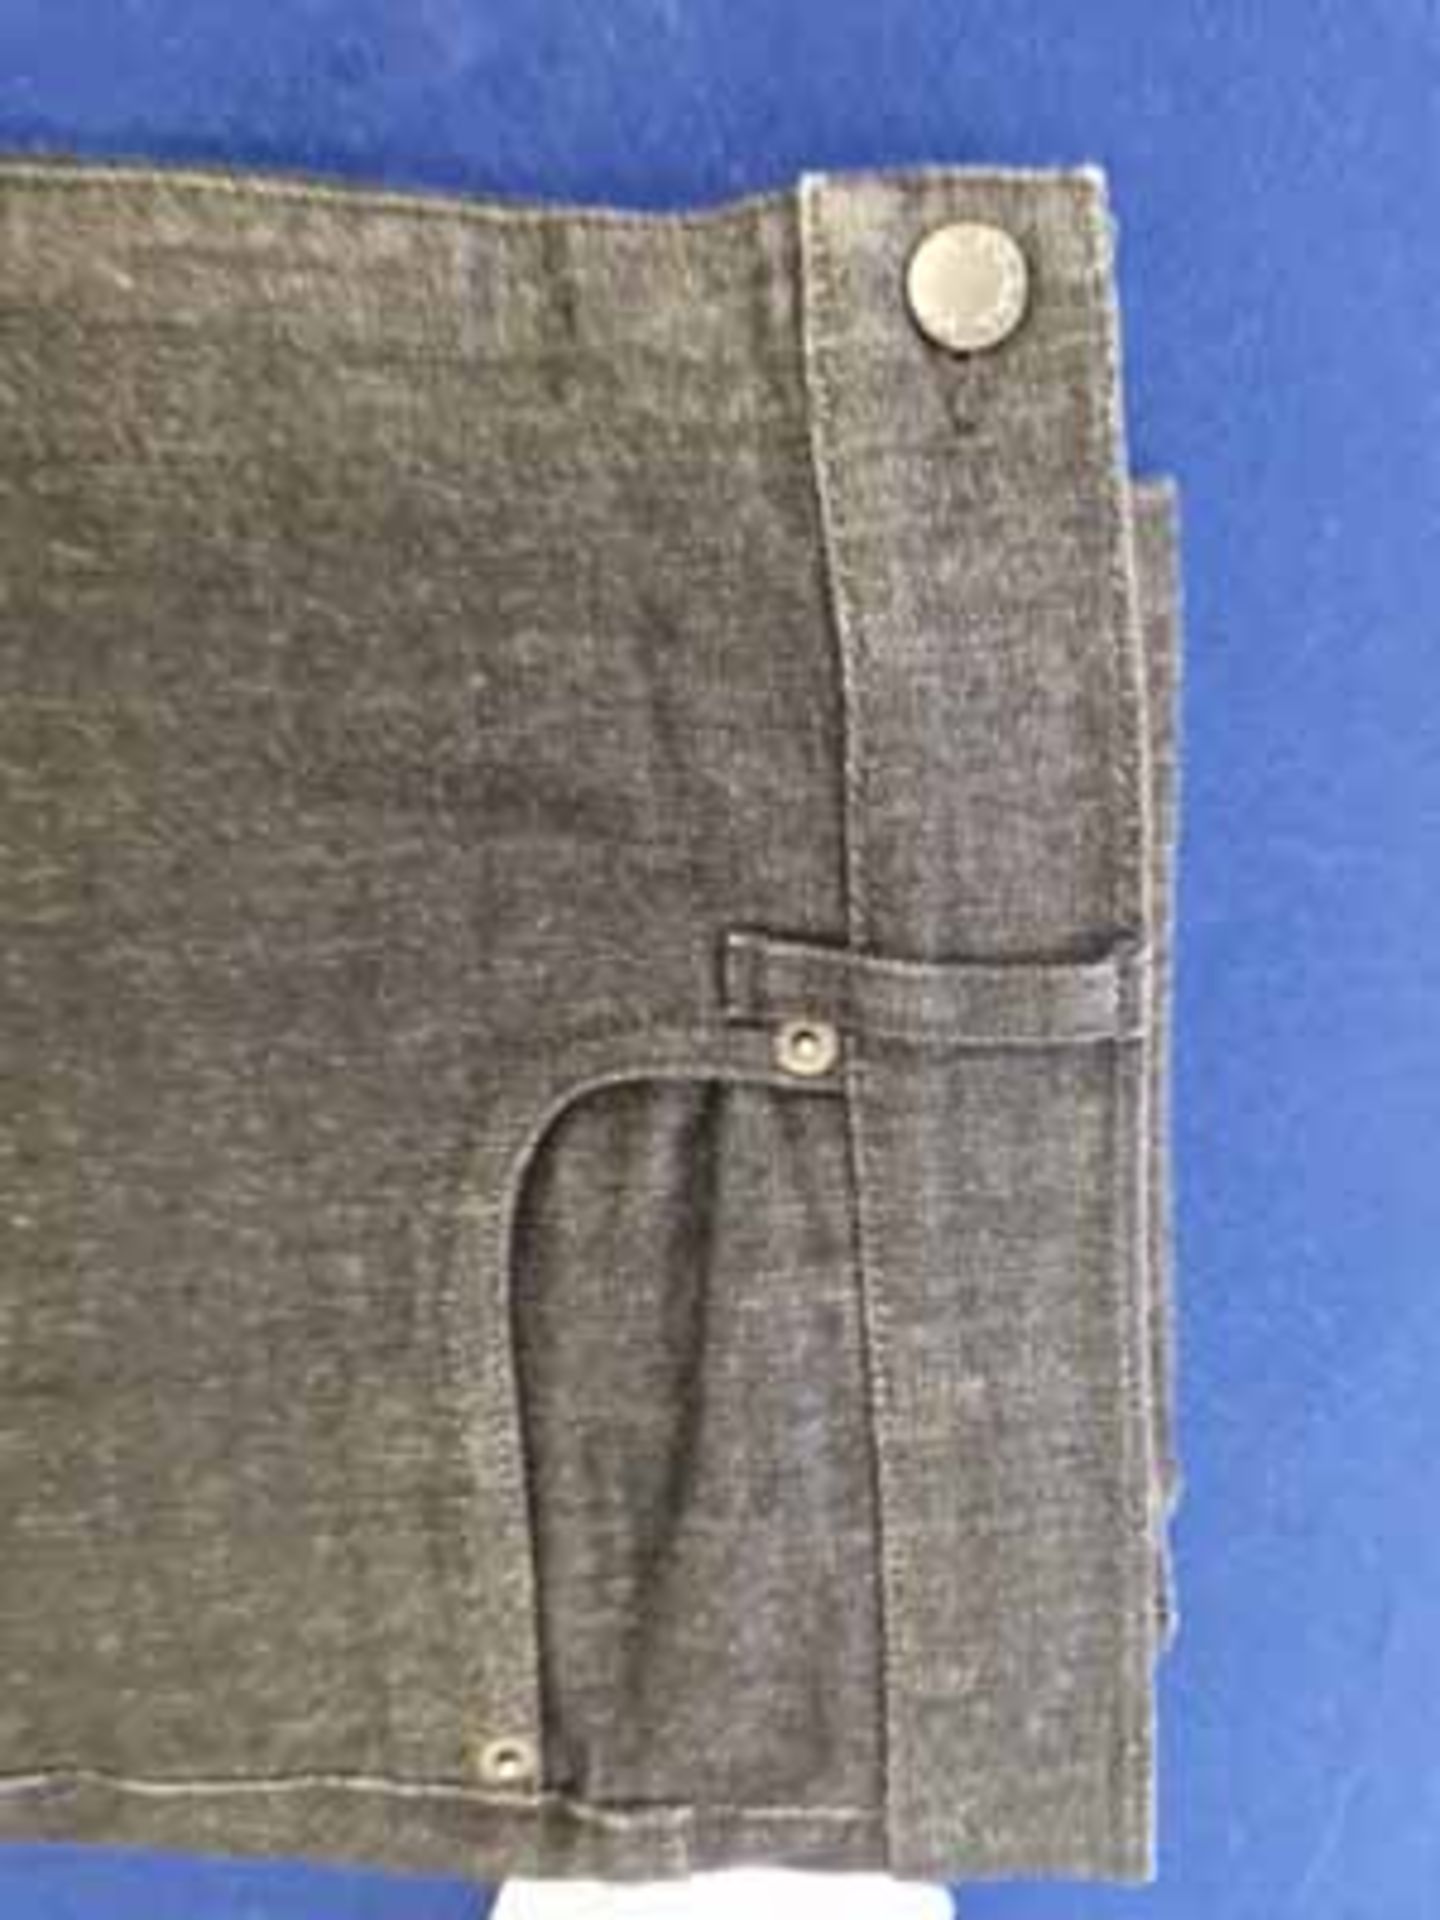 Two Pairs of PRADA Men's Jeans:- - Denim 5-Pocket Jeans in Black Raw Finish and Tonal Stitching, - Image 3 of 4